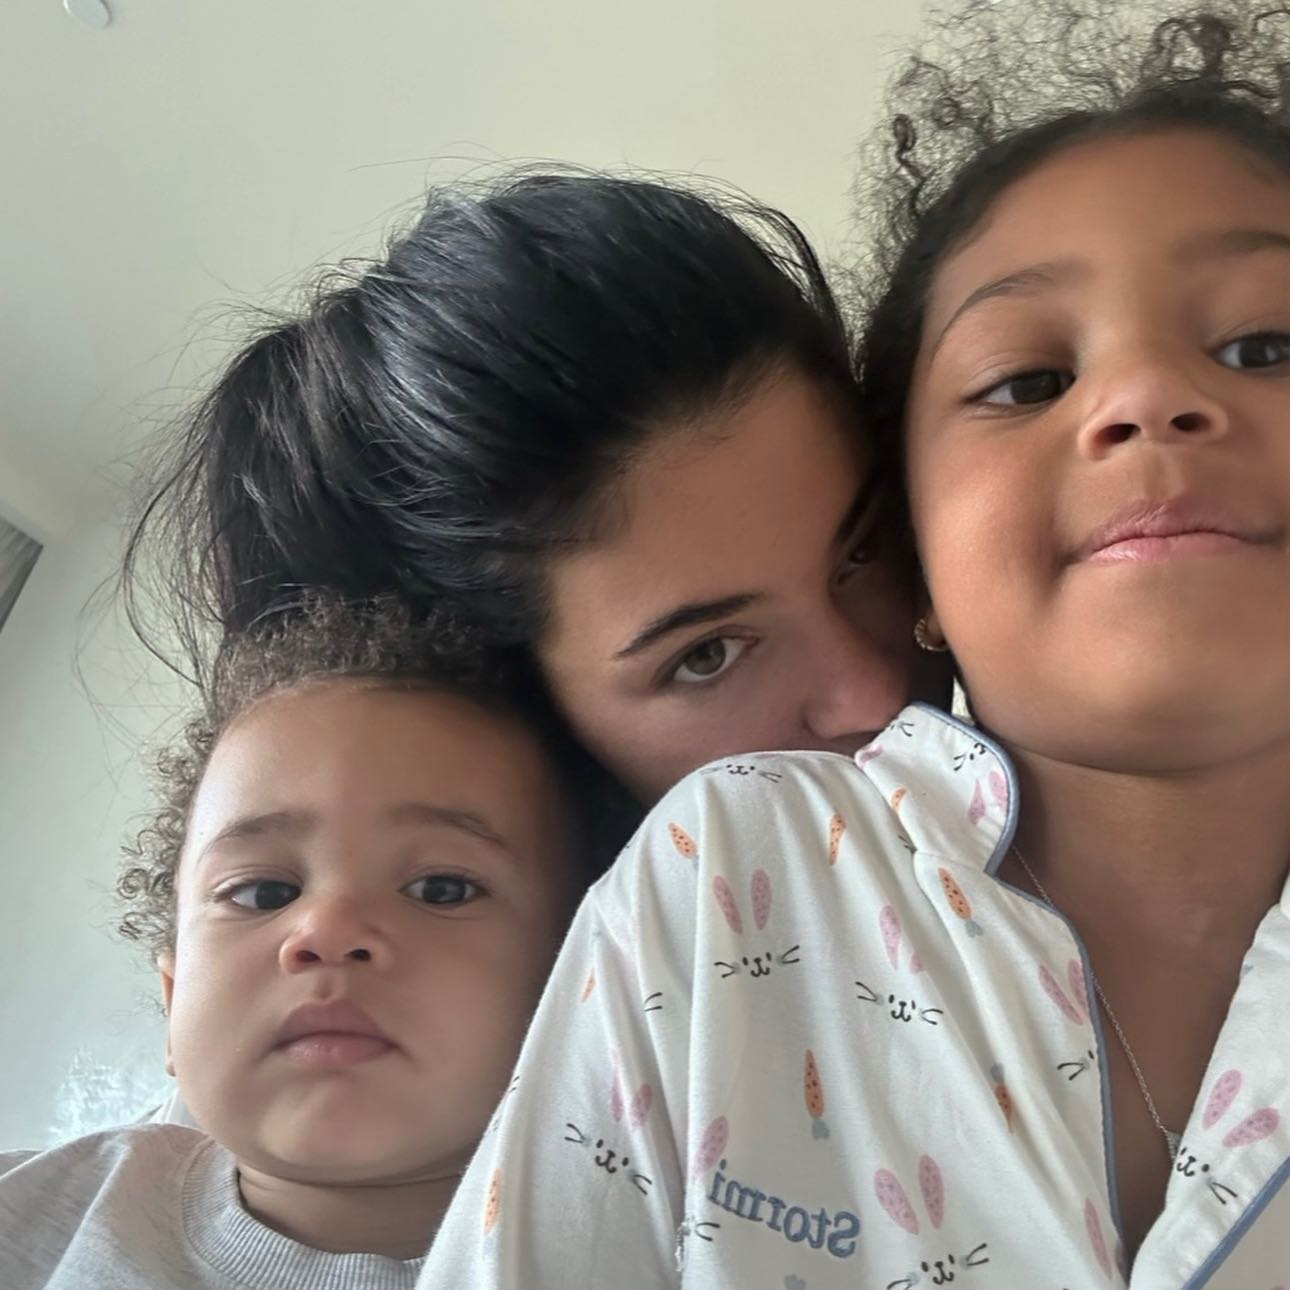 Kylie is a mom to two kids: Stormi and Aire, with her ex, Travis Scott